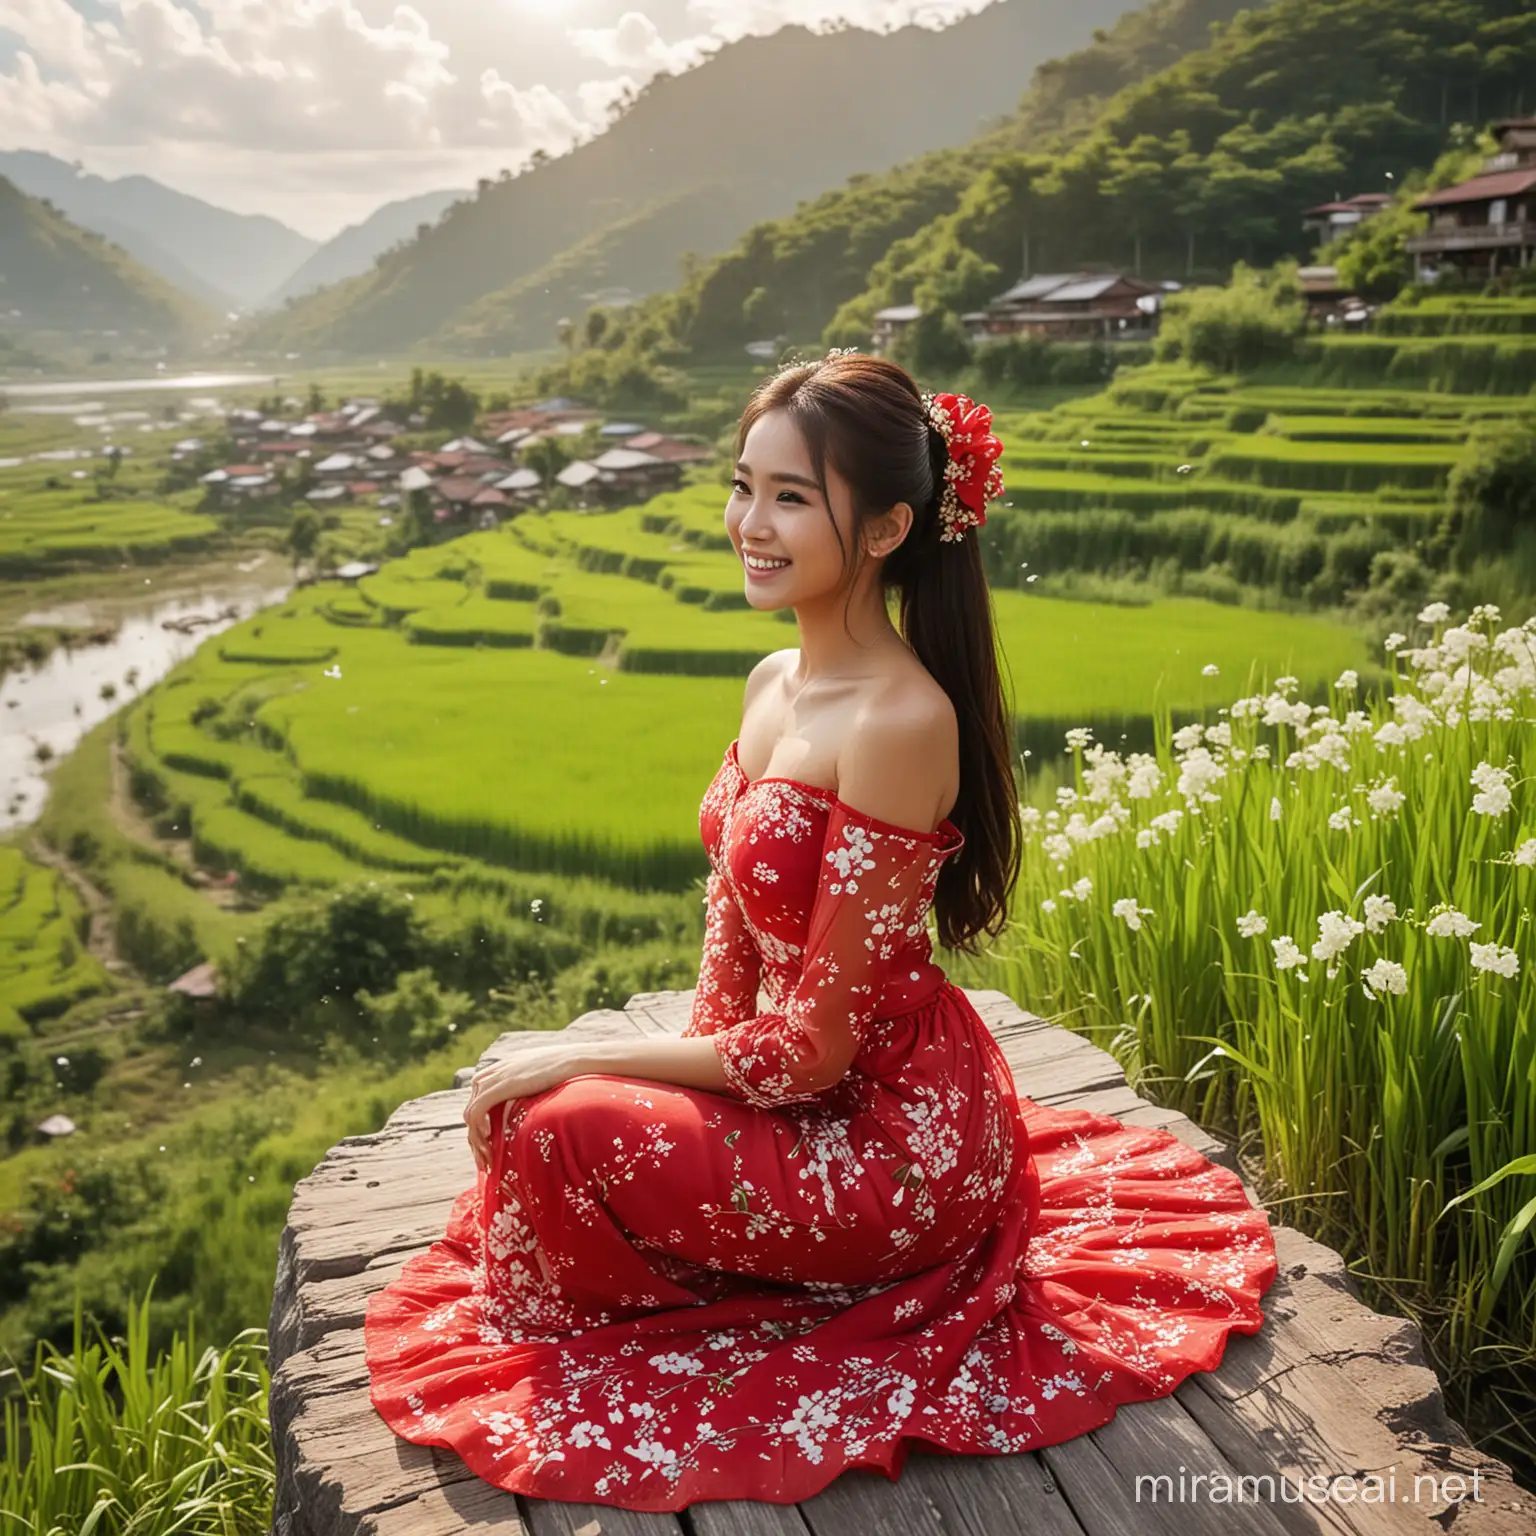 Indonesian Girl in Red Kebaya Dress Posing on a Rock with Green Rice Fields and Serene Waterfront